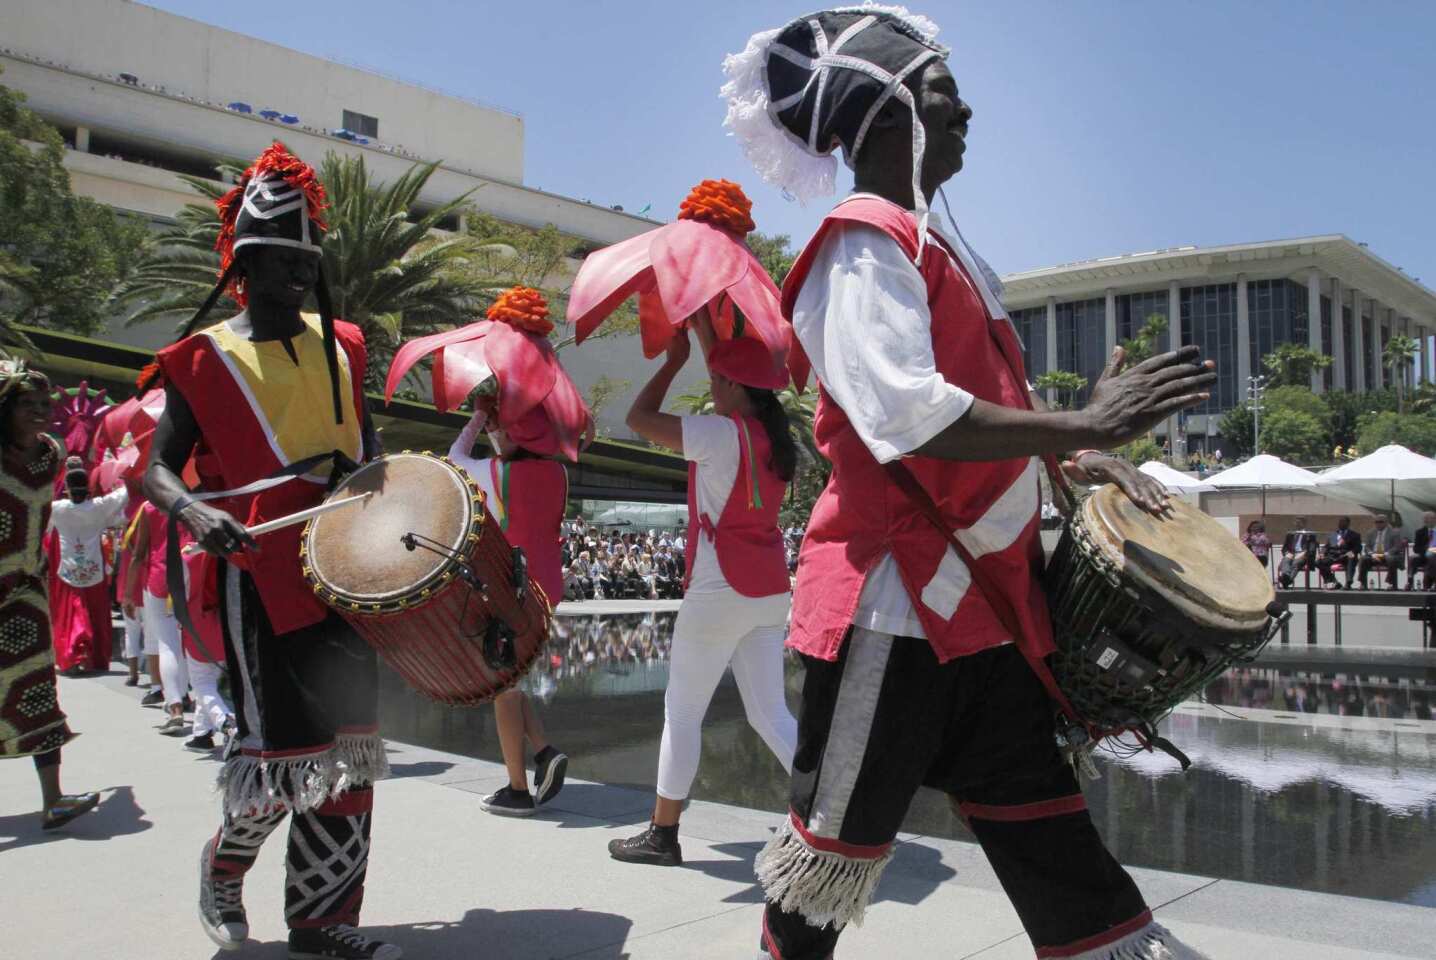 Drummers take part in the festivities.